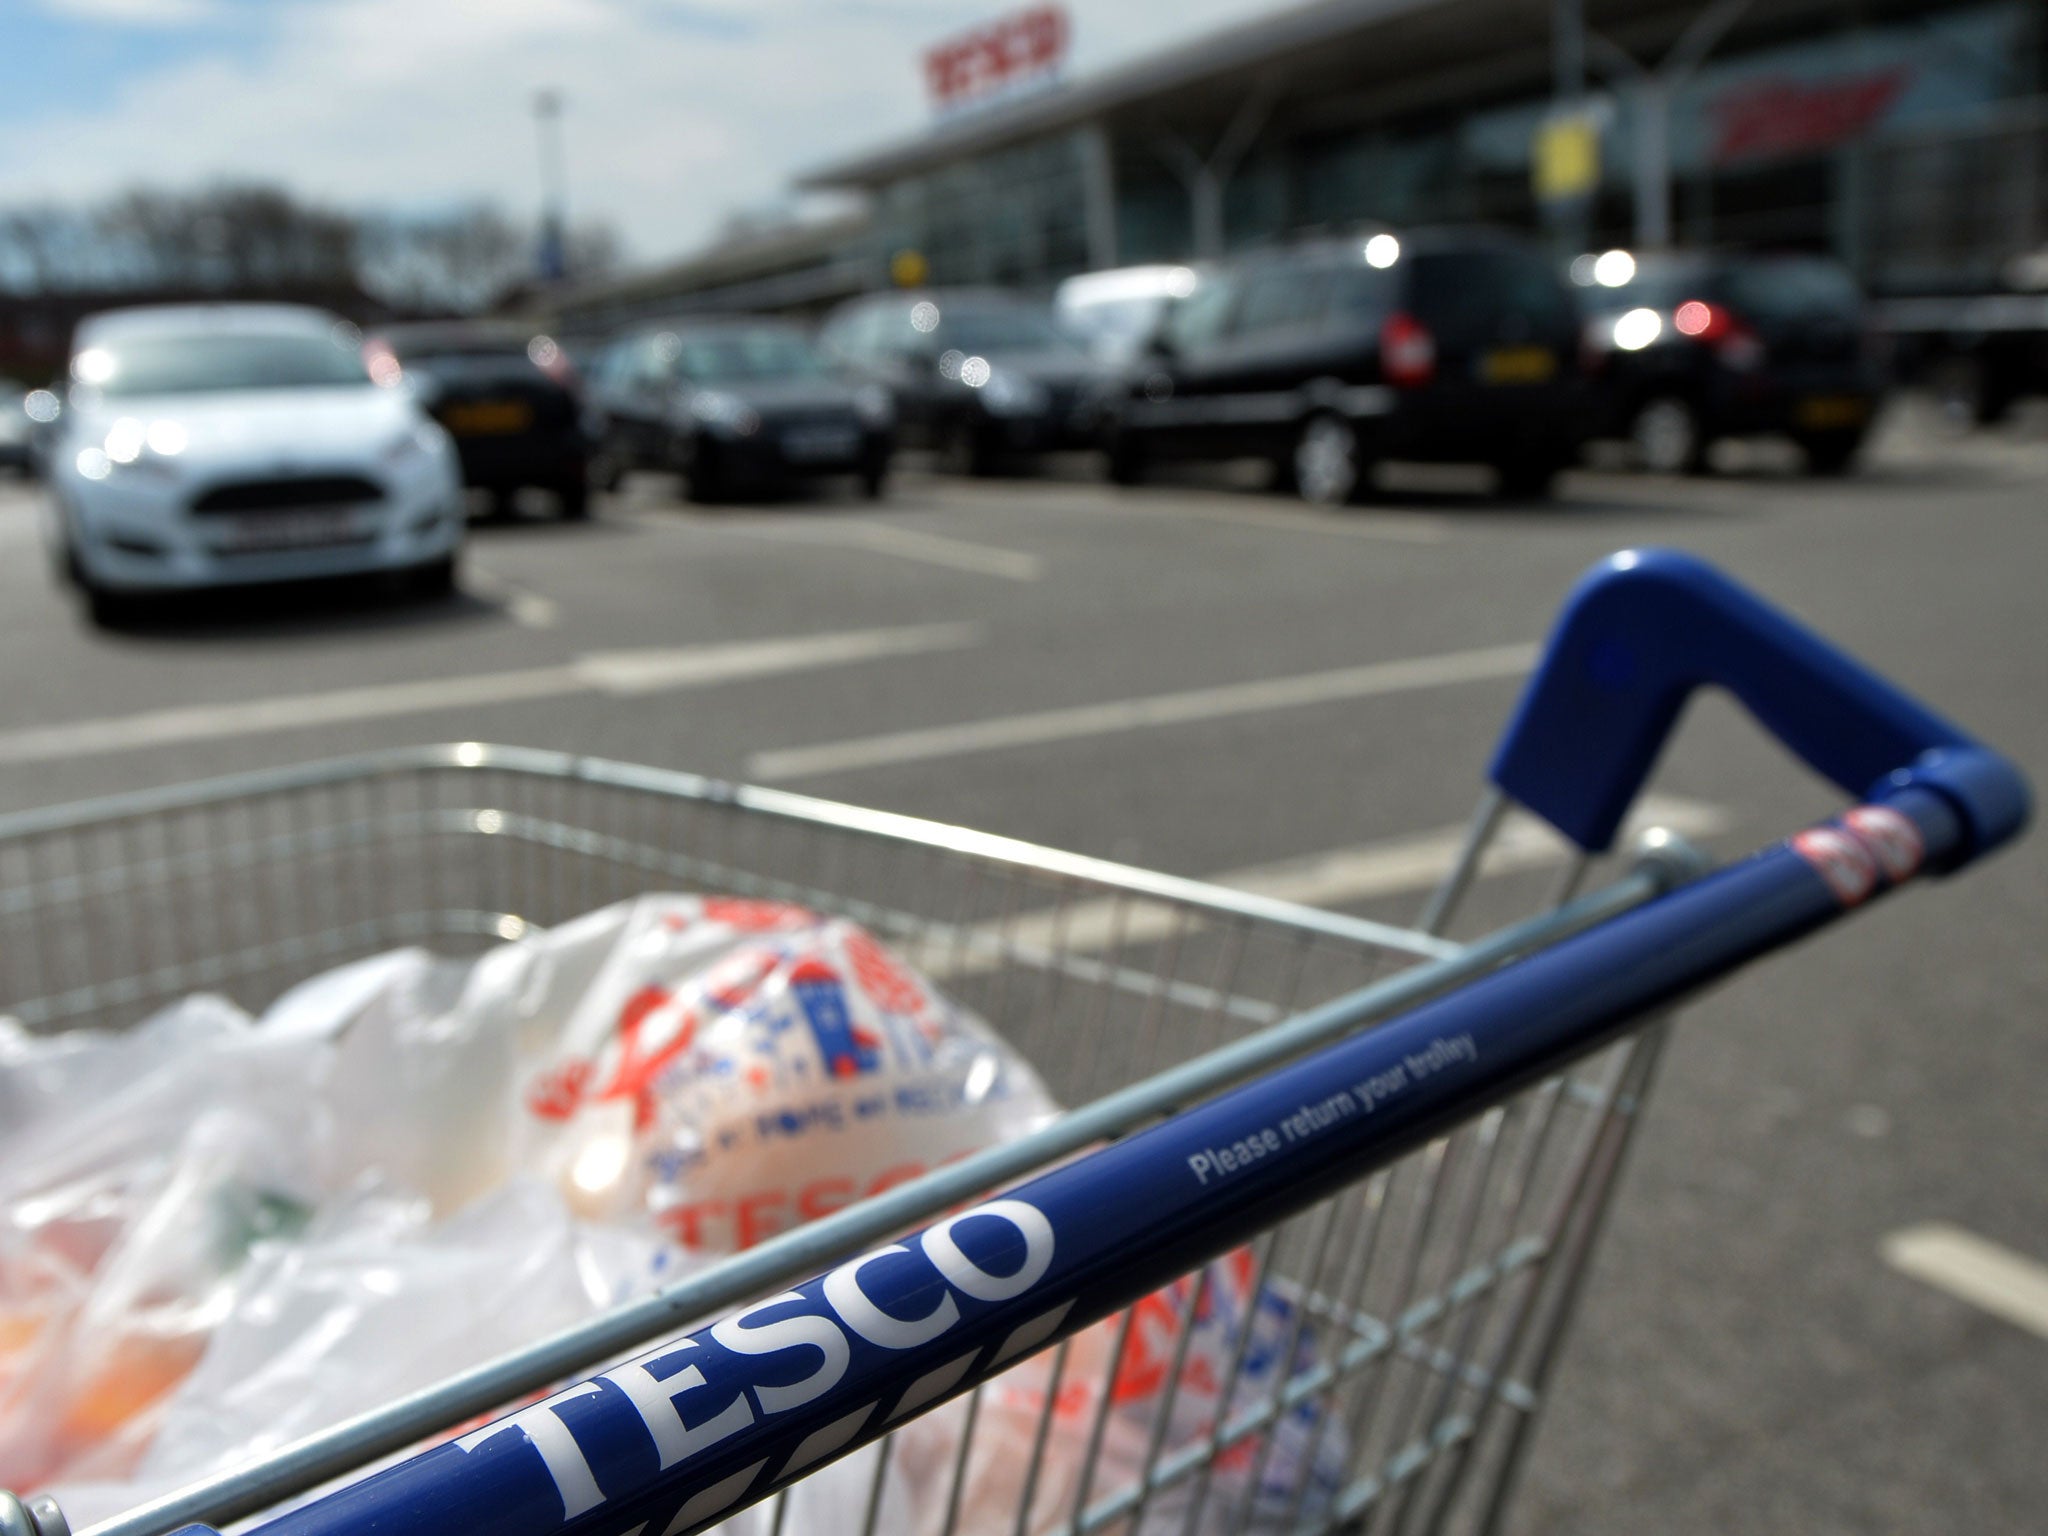 The sale adds to the near £400m worth already sold by Tesco's biggest investors in the past two months